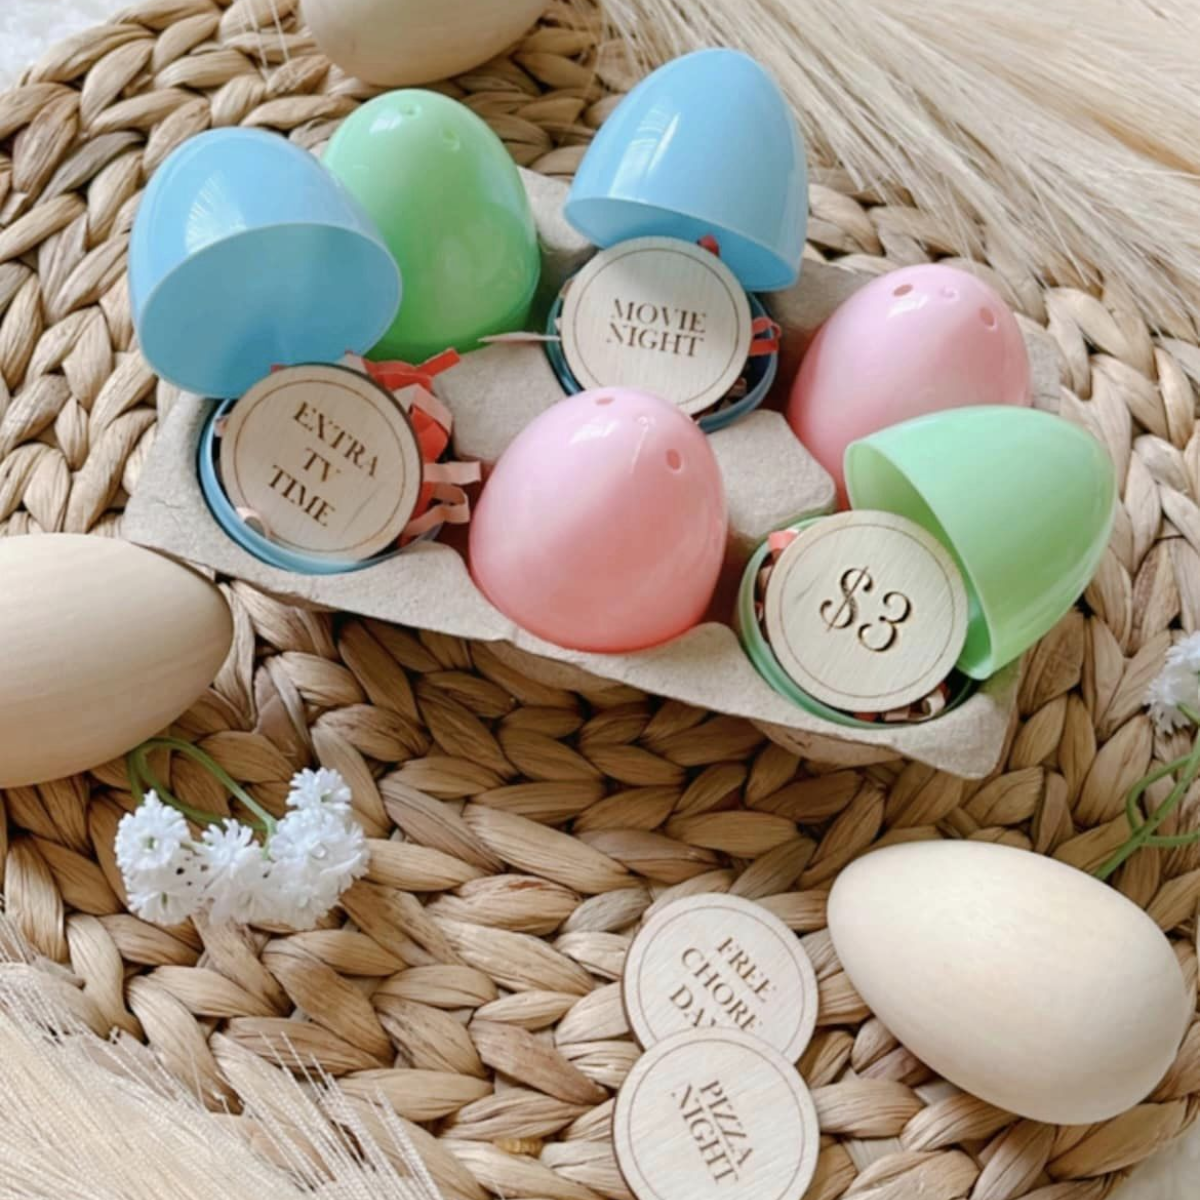 Wooden tokens displayed inside of easter eggs. Each token has a prize for redemption engraved on it. Examples include Extra TV Time, Movie Night, $3, Free Chore Day, Pizza Night